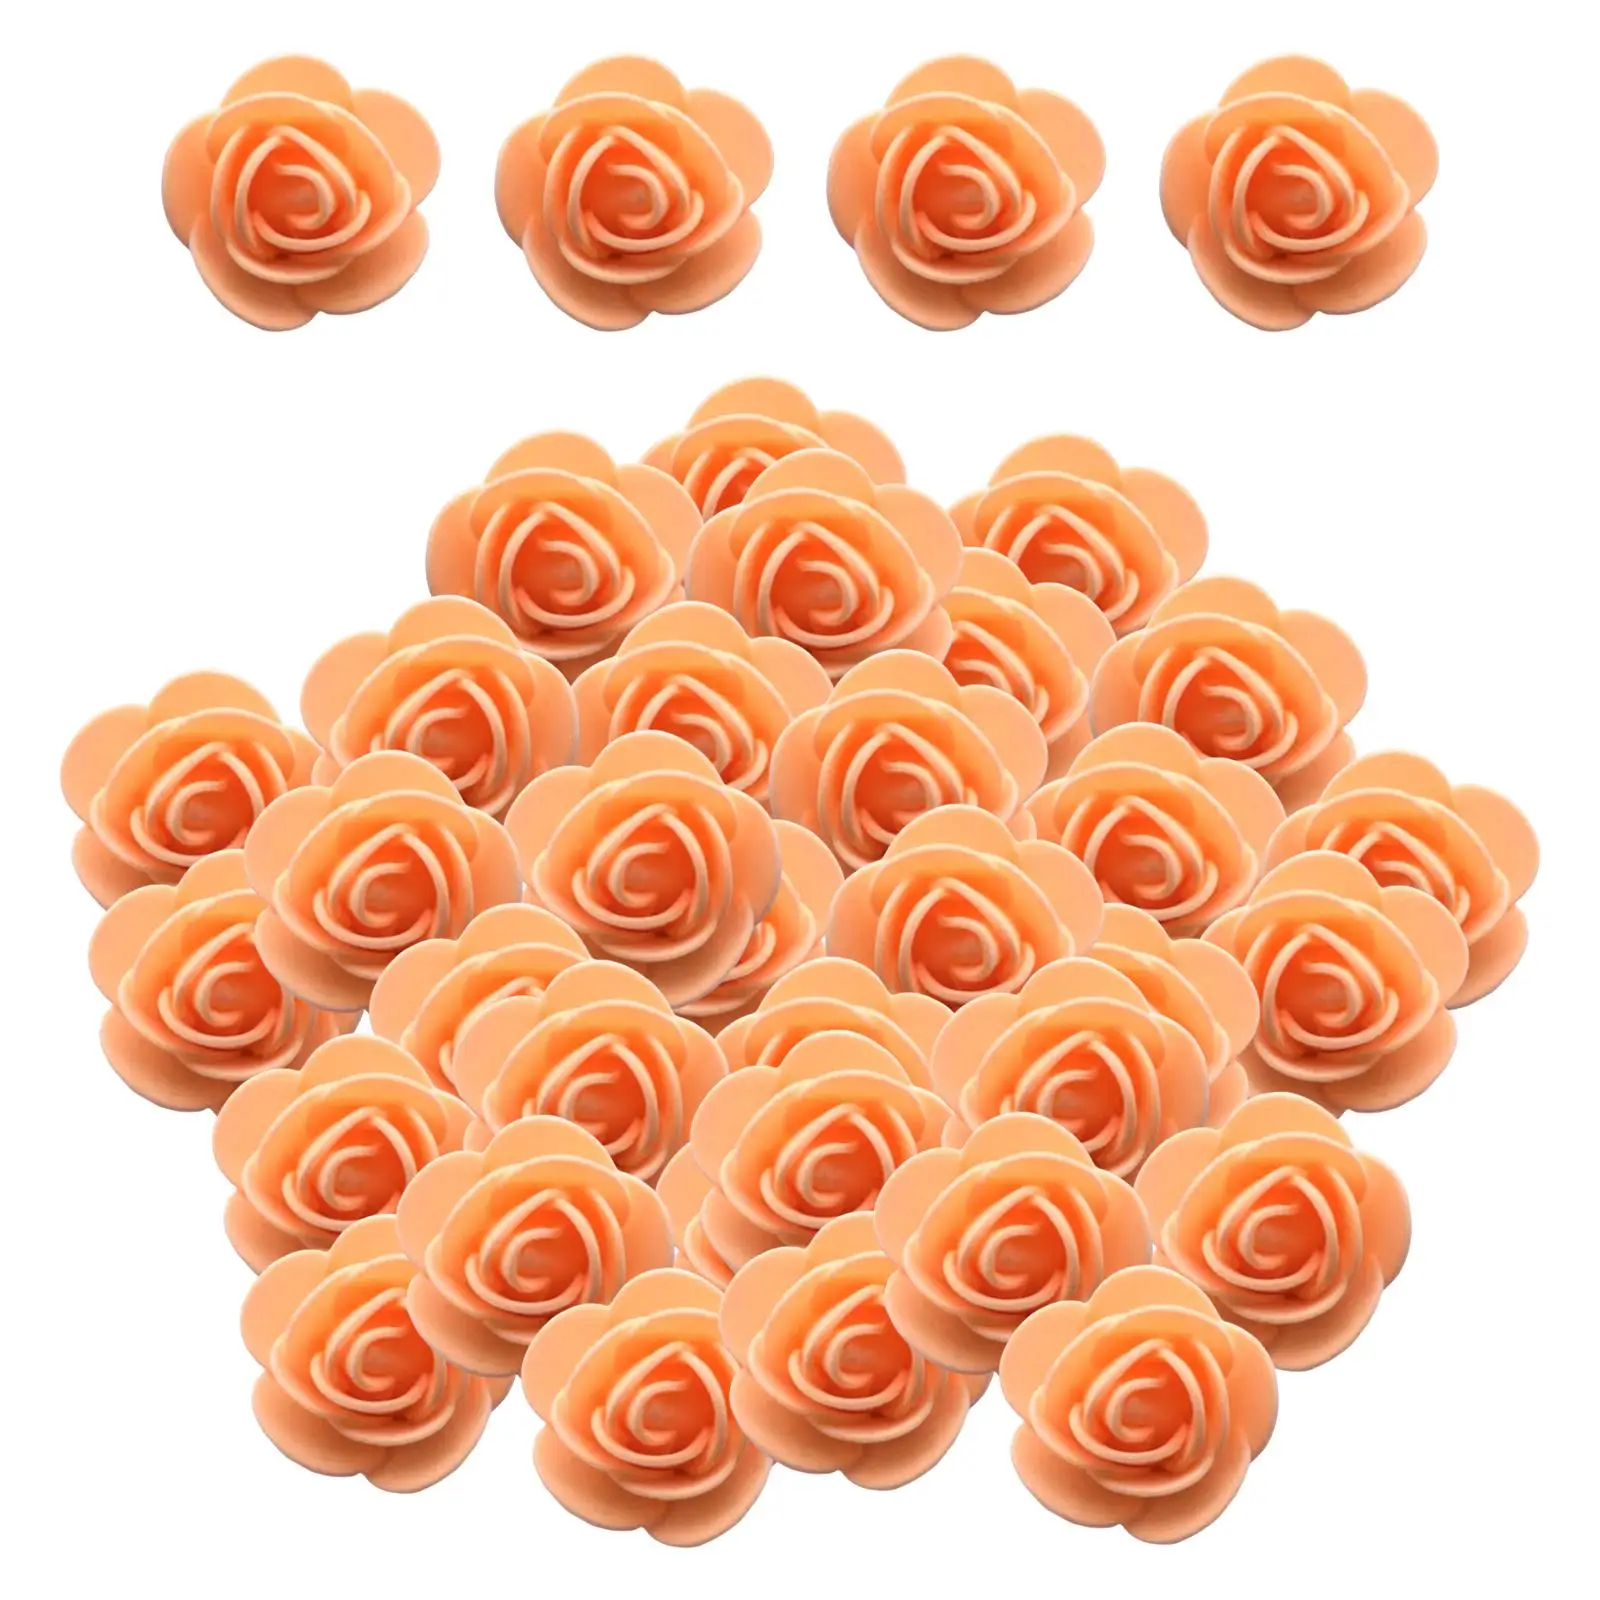 500x Mini Artificial Rose Heads Stemless Flower Heads Flower Arrangement for Wedding DIY Gifts Boxes Home Table Decoration